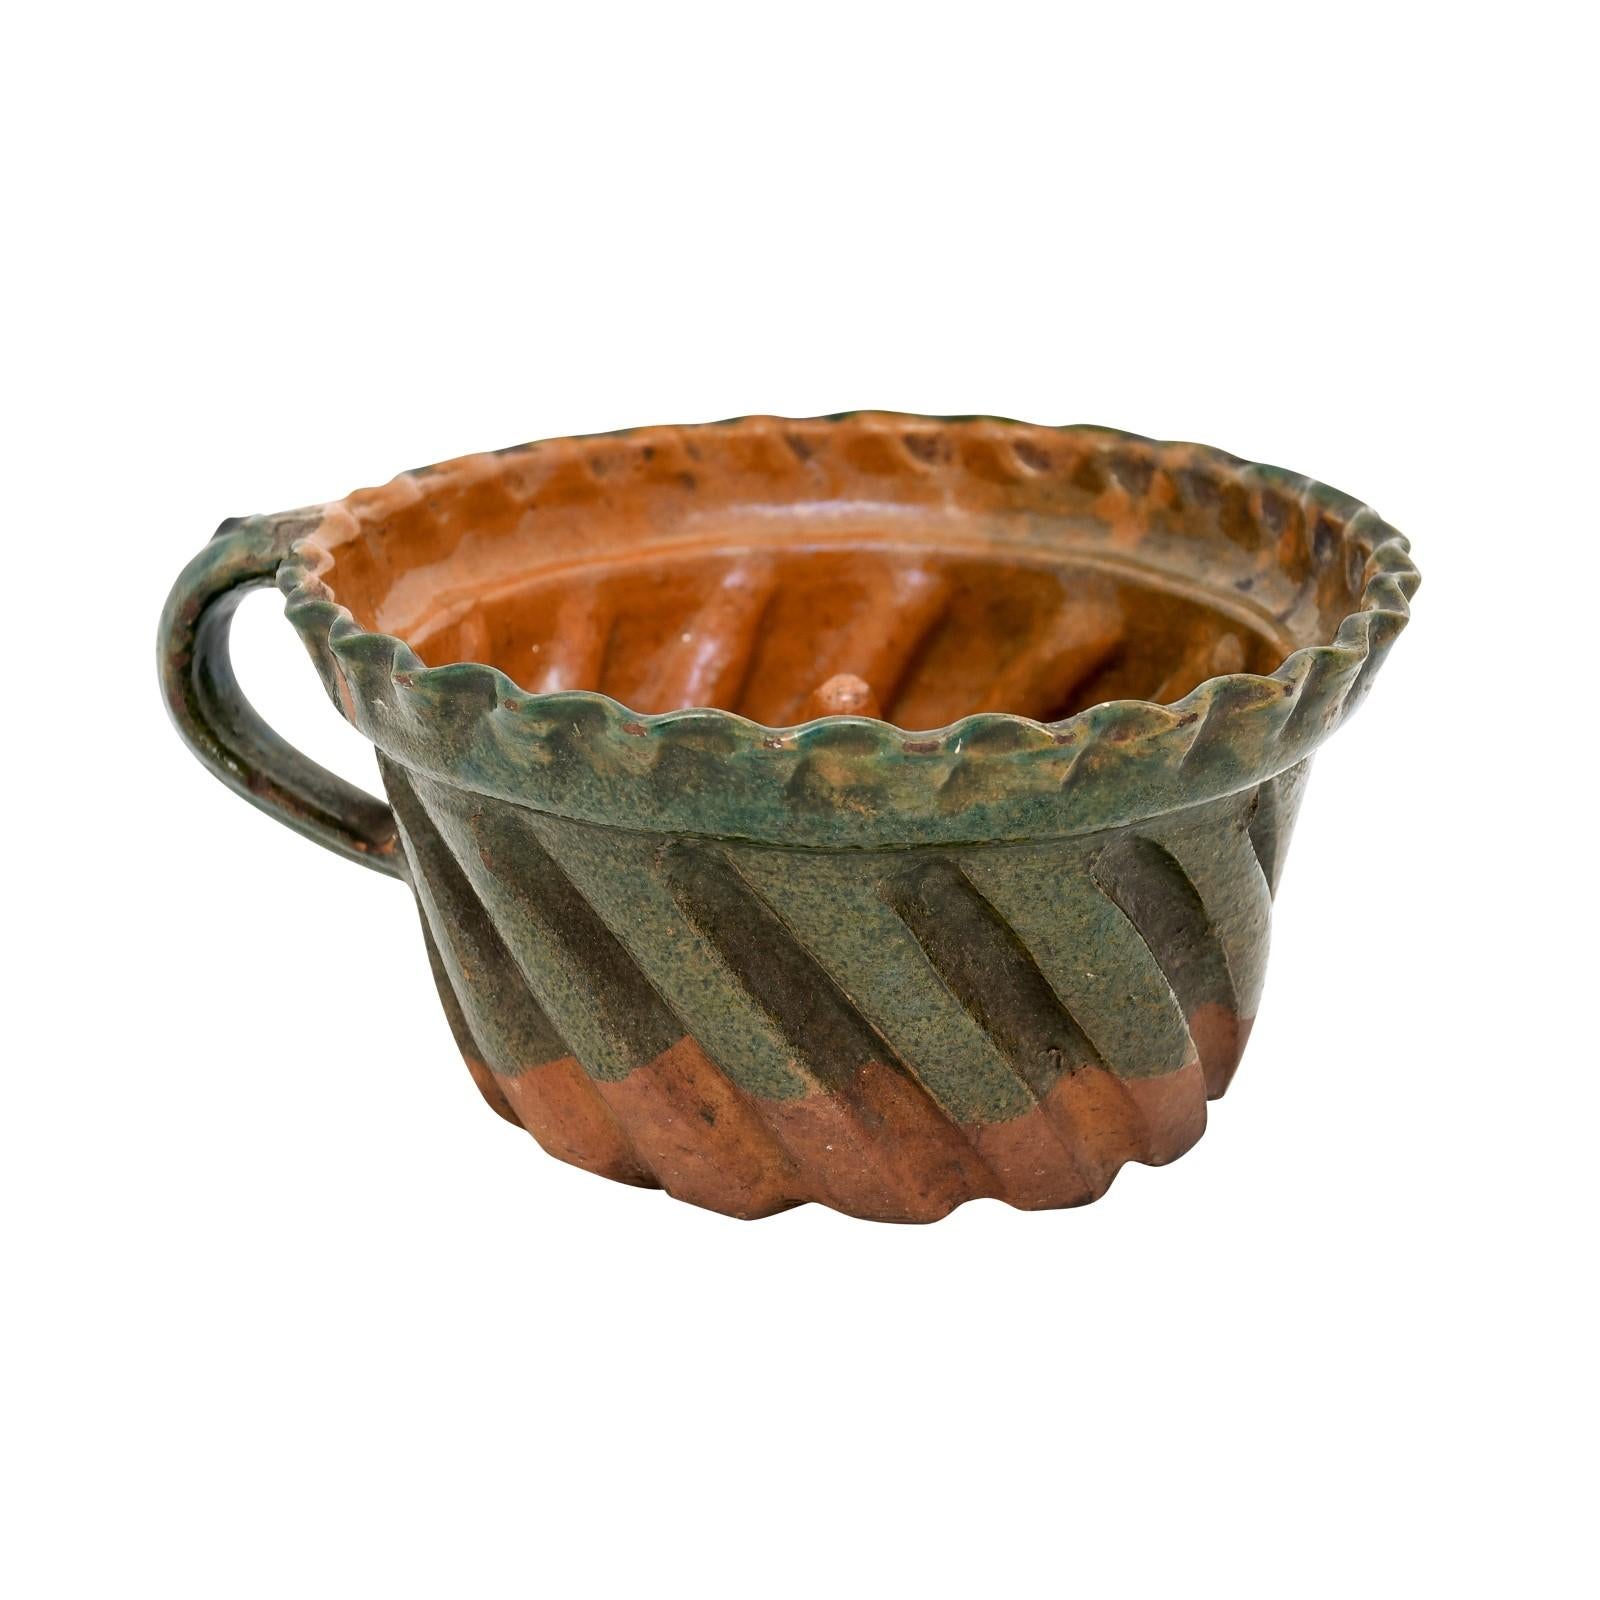 A rustic French pottery cake mold from the 19th century with green glaze. Delight in the antique charm of this 19th century French pottery cake mold. With its rustic allure and charmingly antiquated design, this piece encapsulates the beauty of